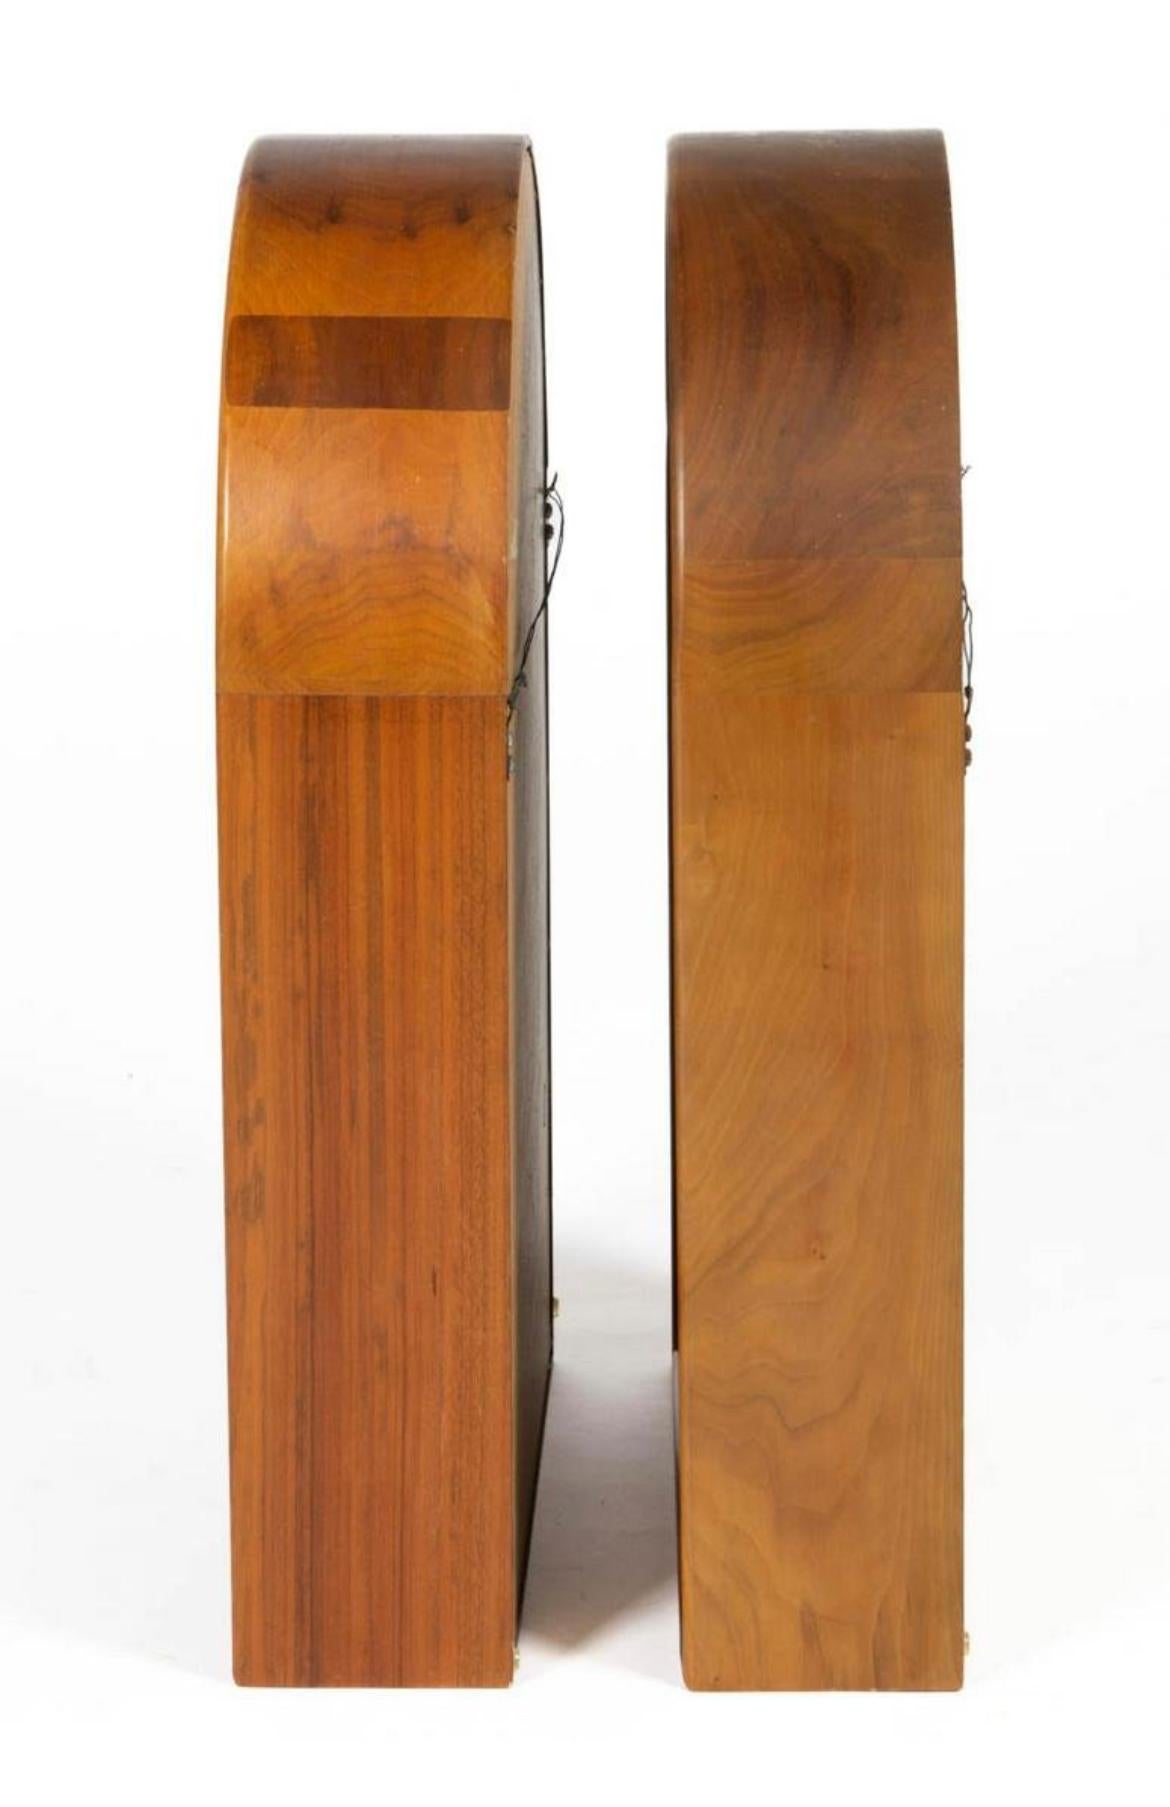 Pair of beautiful mid century Danish modern teak small display wall shelves - arched form with three fixed shelves. Wired to hang on wall vertically. Sold as a set of (2). Located in Brooklyn NYC.

Each unit Measures 26 1/2